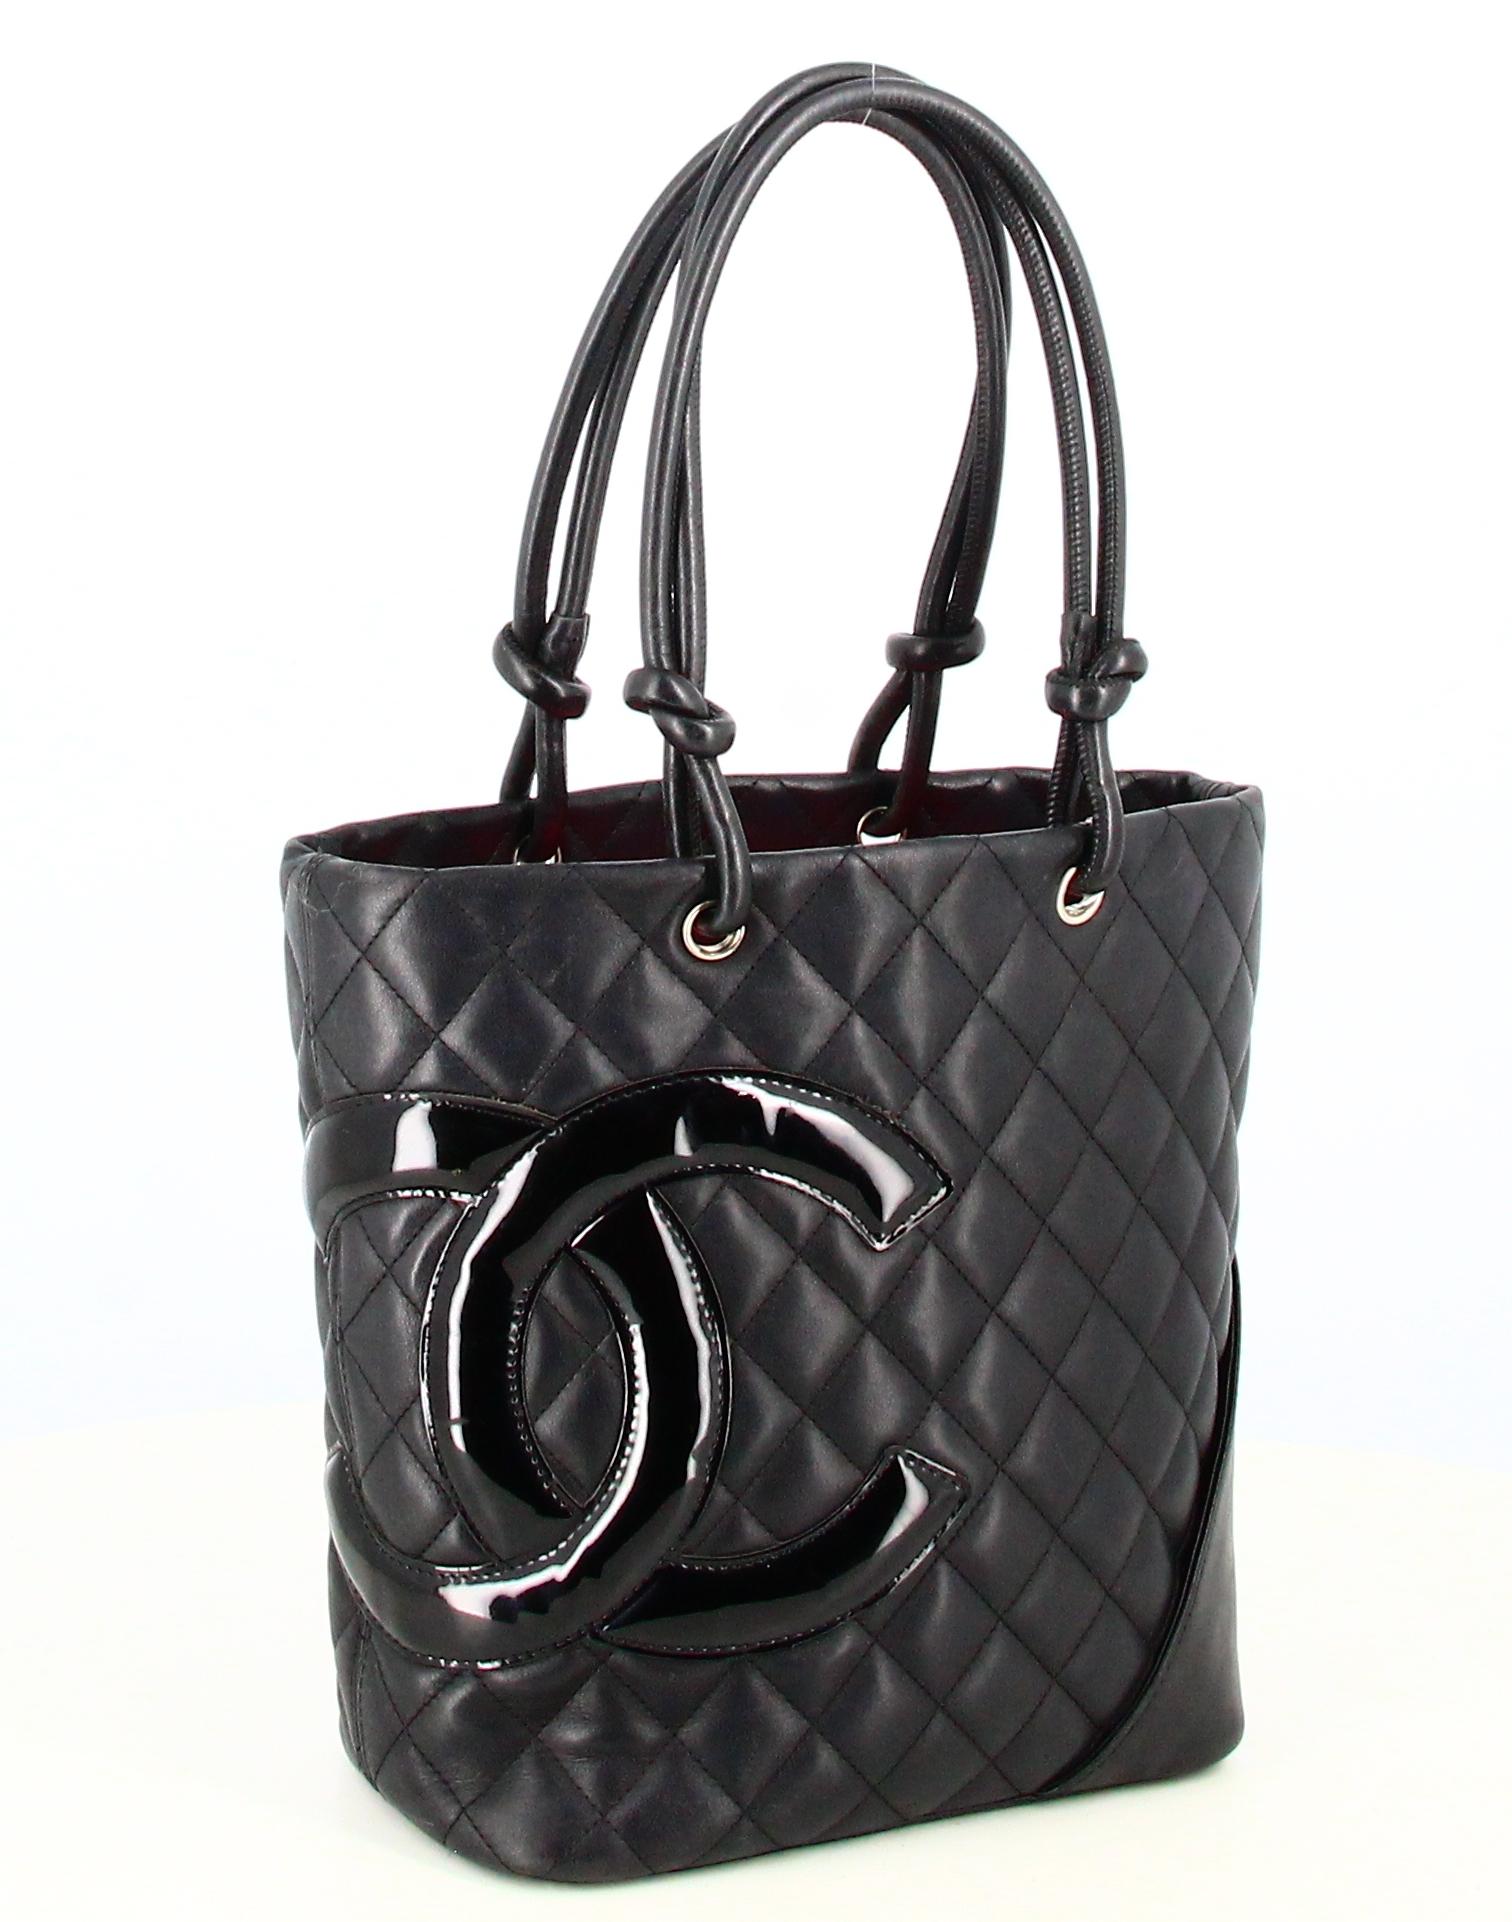 Women's Chanel Cambon Handbag Black Quilted Leather For Sale